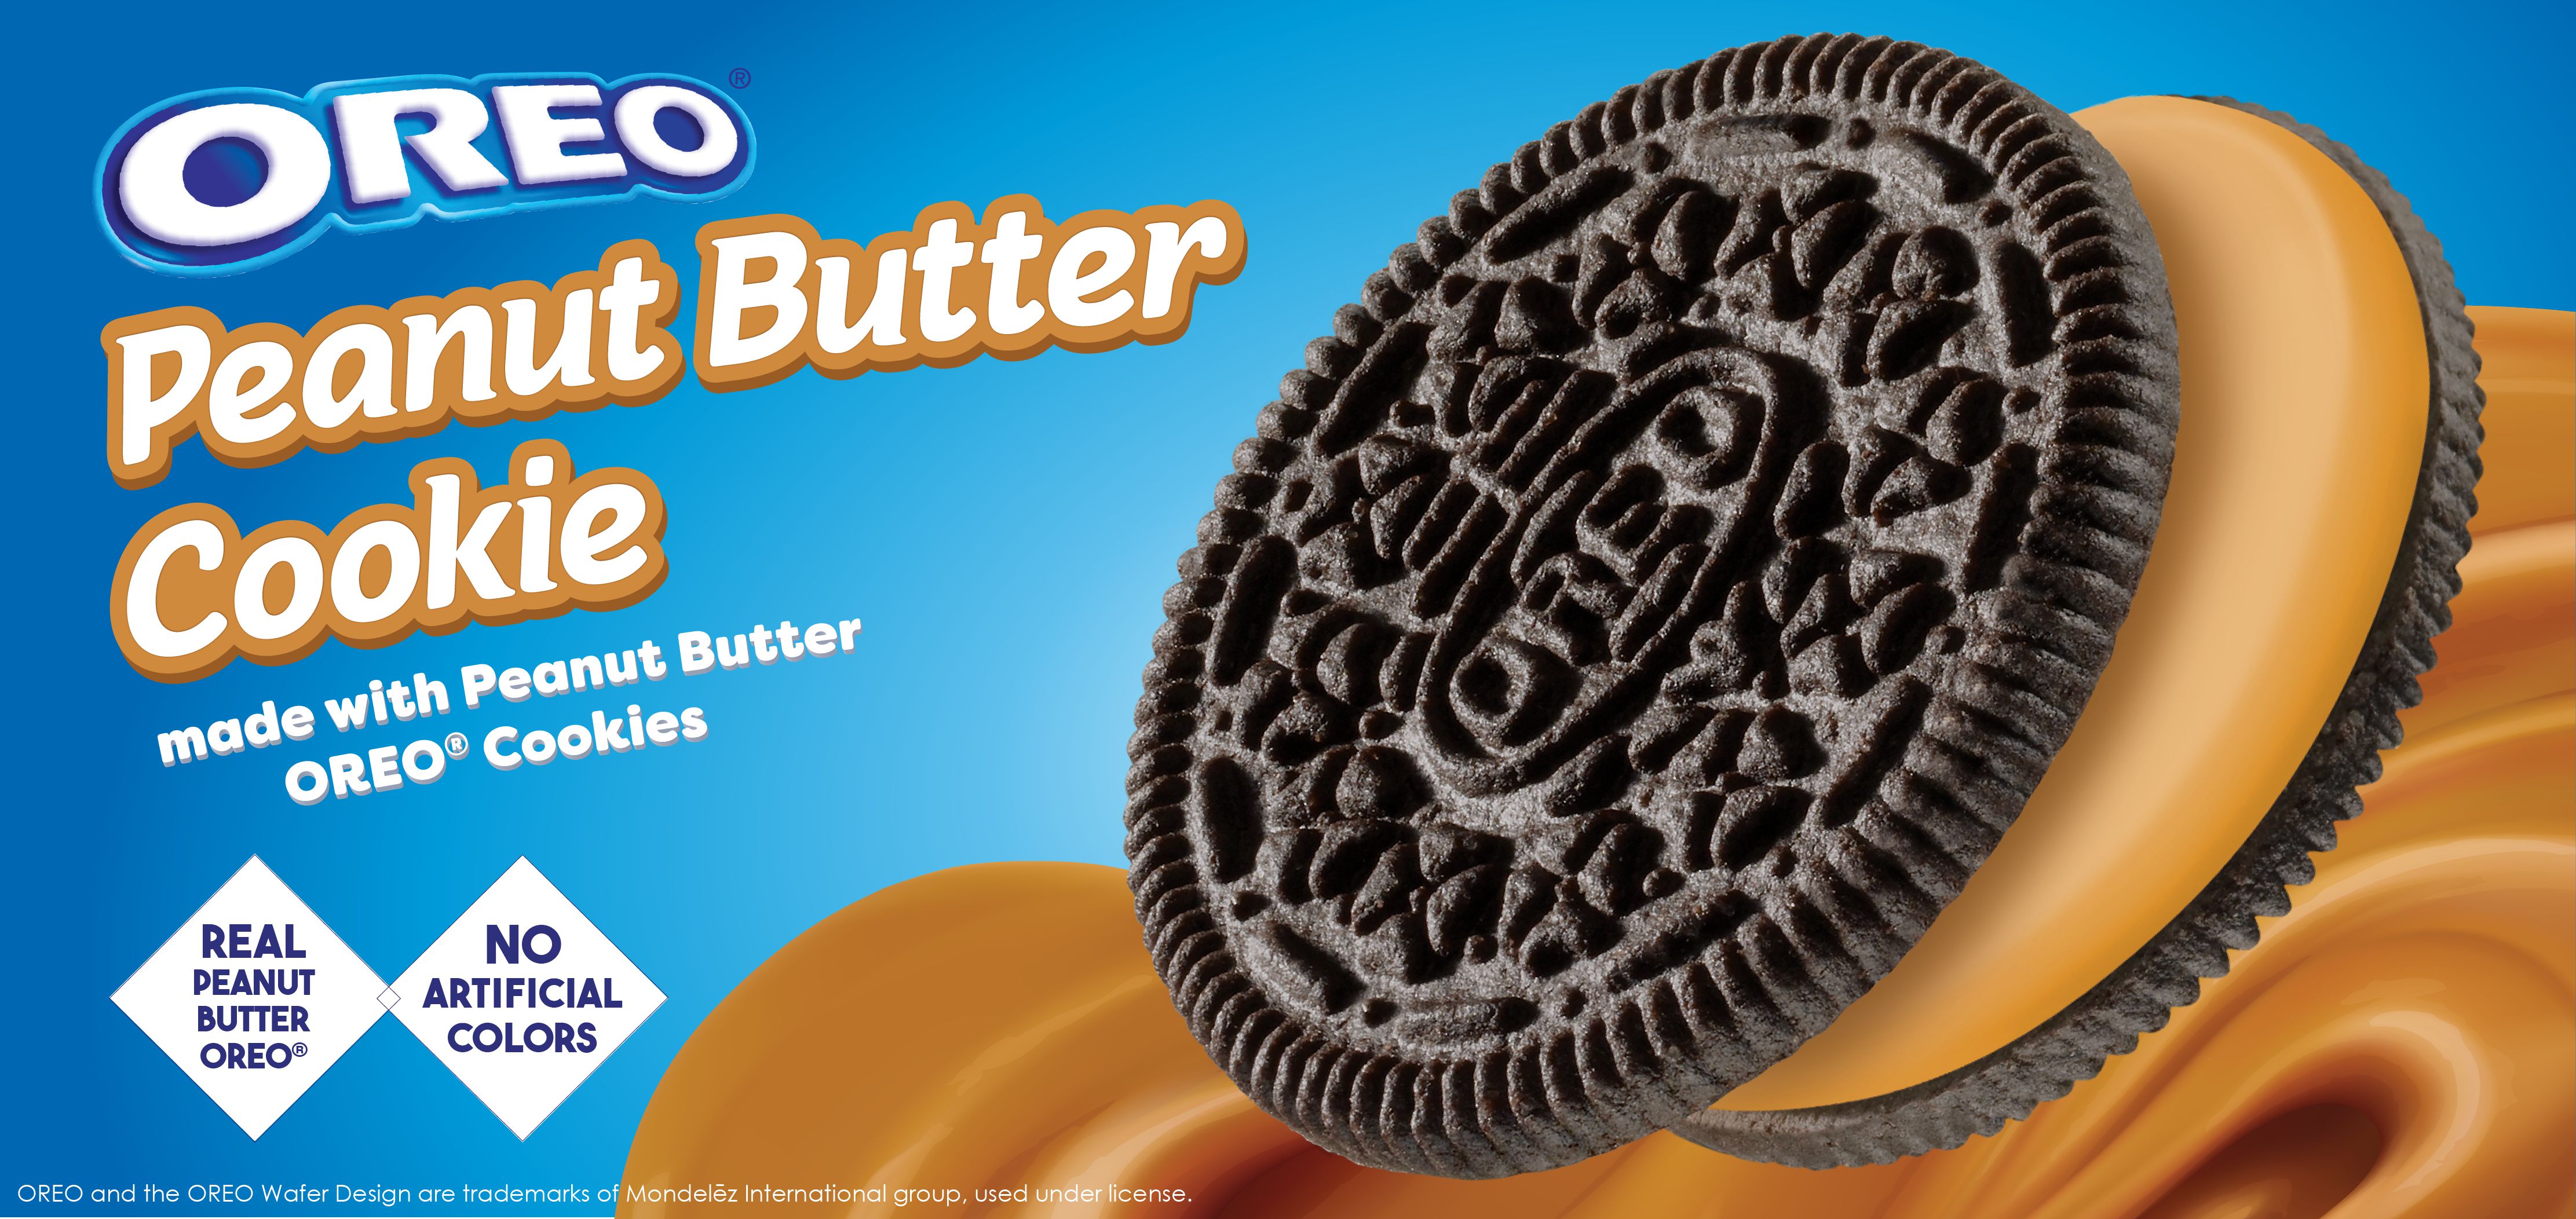 oreo® peanut butter cookie made with peanut butter oreo® cookies label image